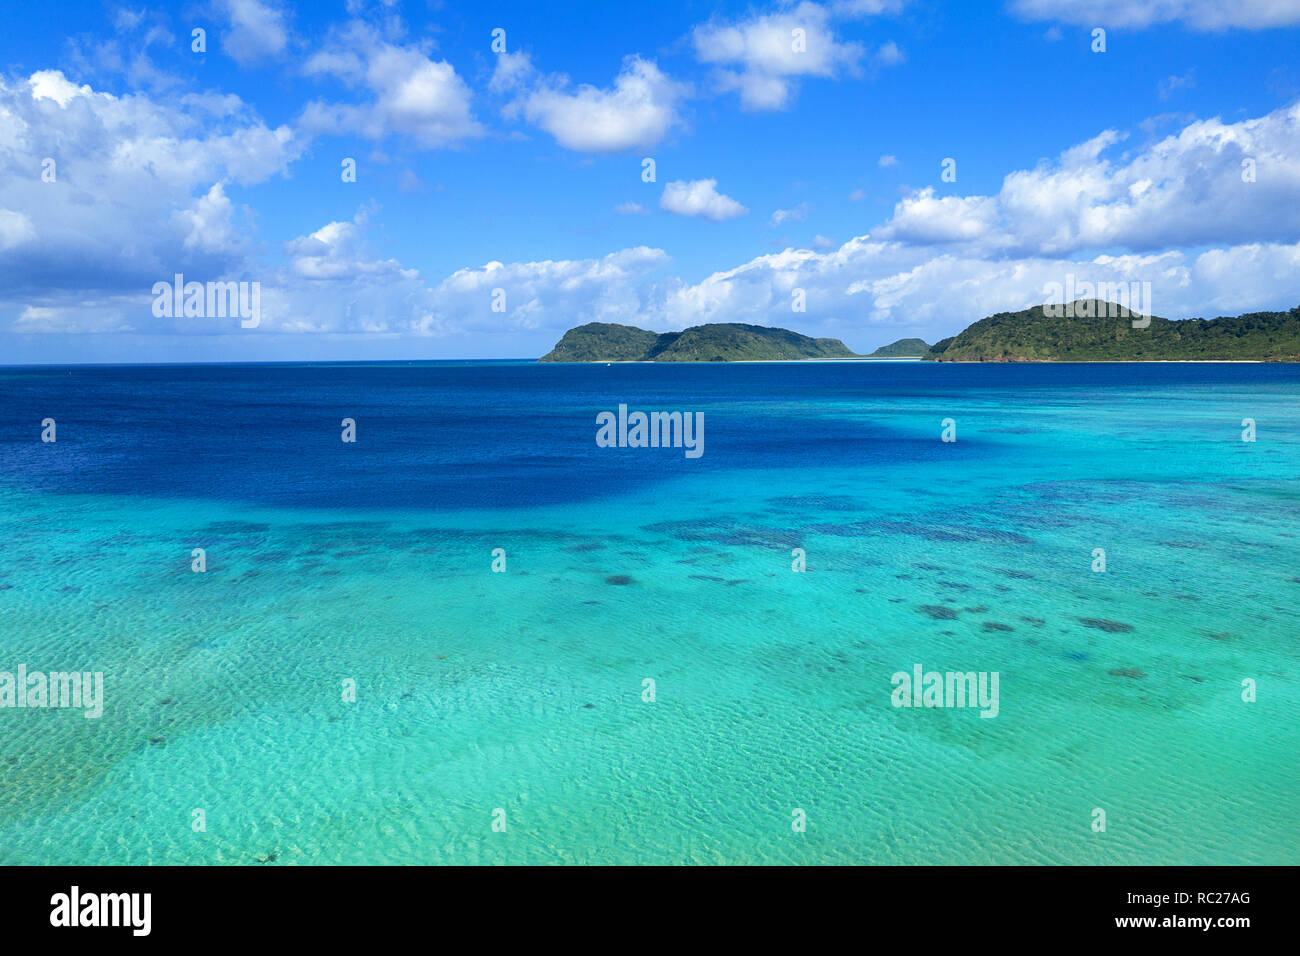 Aerial view of paradise beach, coral reef and turquoise waters at ...